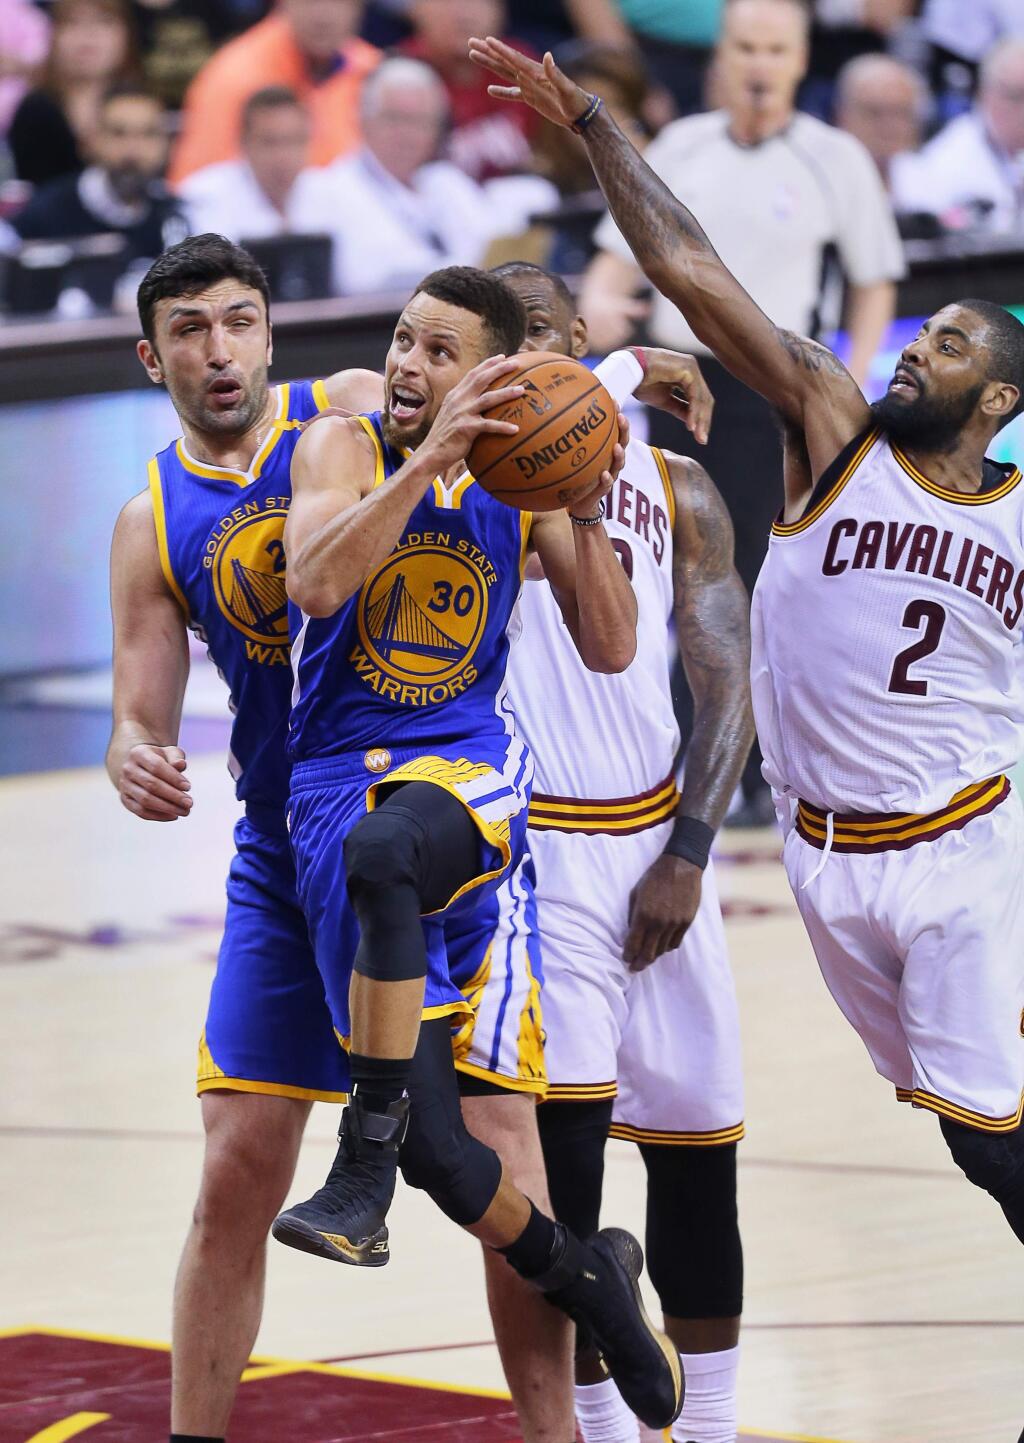 Golden State Warriors guard Stephen Curry goes to the basket against Cleveland Cavaliers guard Kyrie Irving during Game 4 of the NBA Finals in Cleveland on Friday, June 9, 2017. (Christopher Chung/ The Press Democrat)